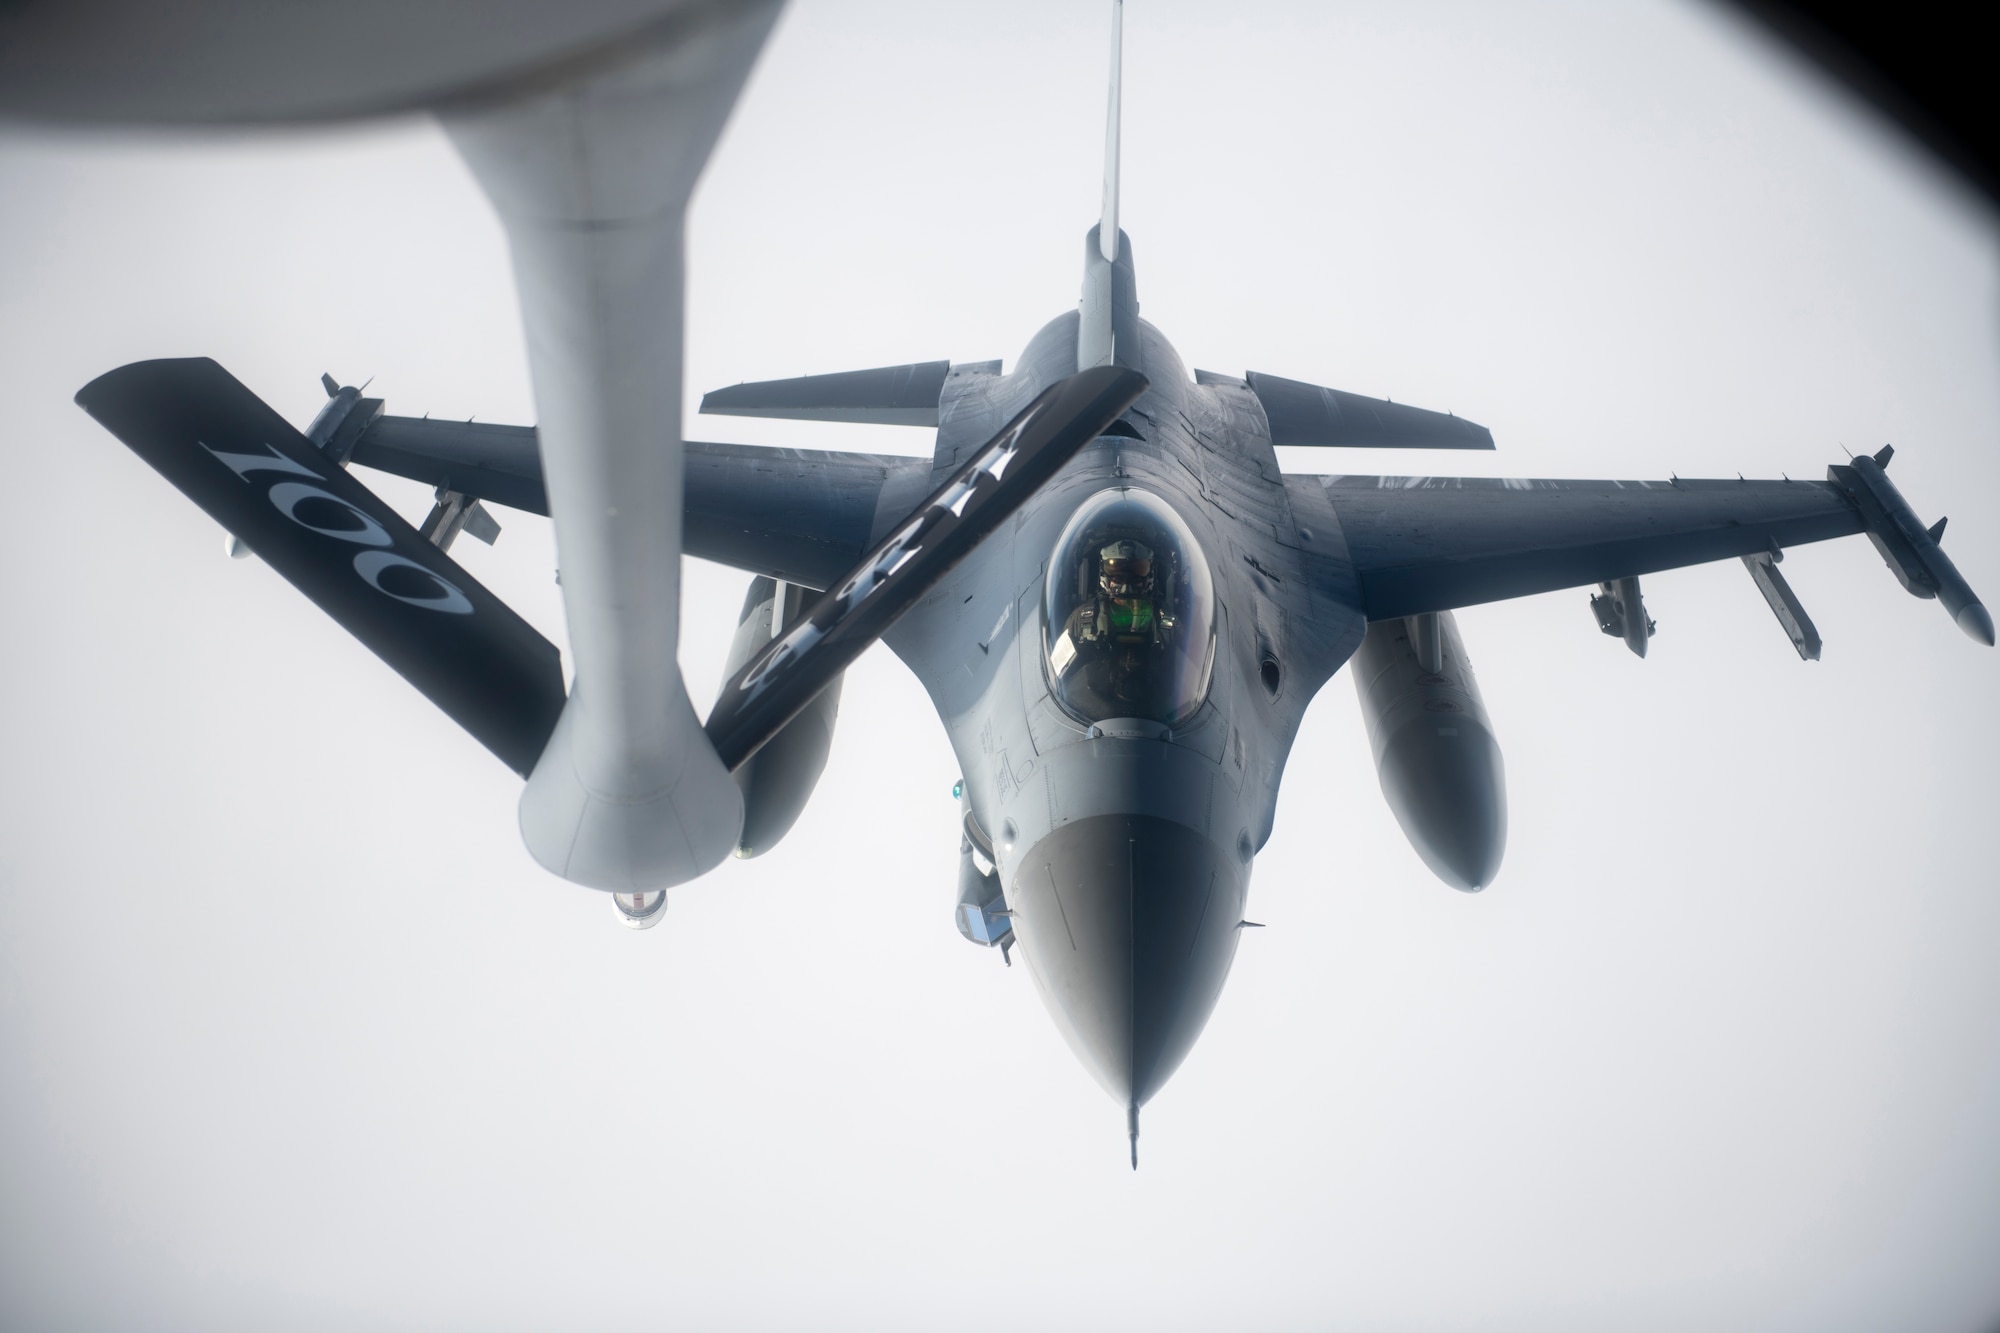 A U.S. Air Force F-16 Fighting Falcon assigned to the 555th Fighter Squadron, Aviano Air Base, Italy, approaches a KC-135 Stratotanker assigned to the 100th Air Refueling Wing, RAF Mildenhall, United Kingdom, before receiving fuel during a mission over the Black Sea, Jan. 14, 2021. U.S. military operations in the Black Sea enhance regional stability, combined readiness and capability with our NATO allies and partners.